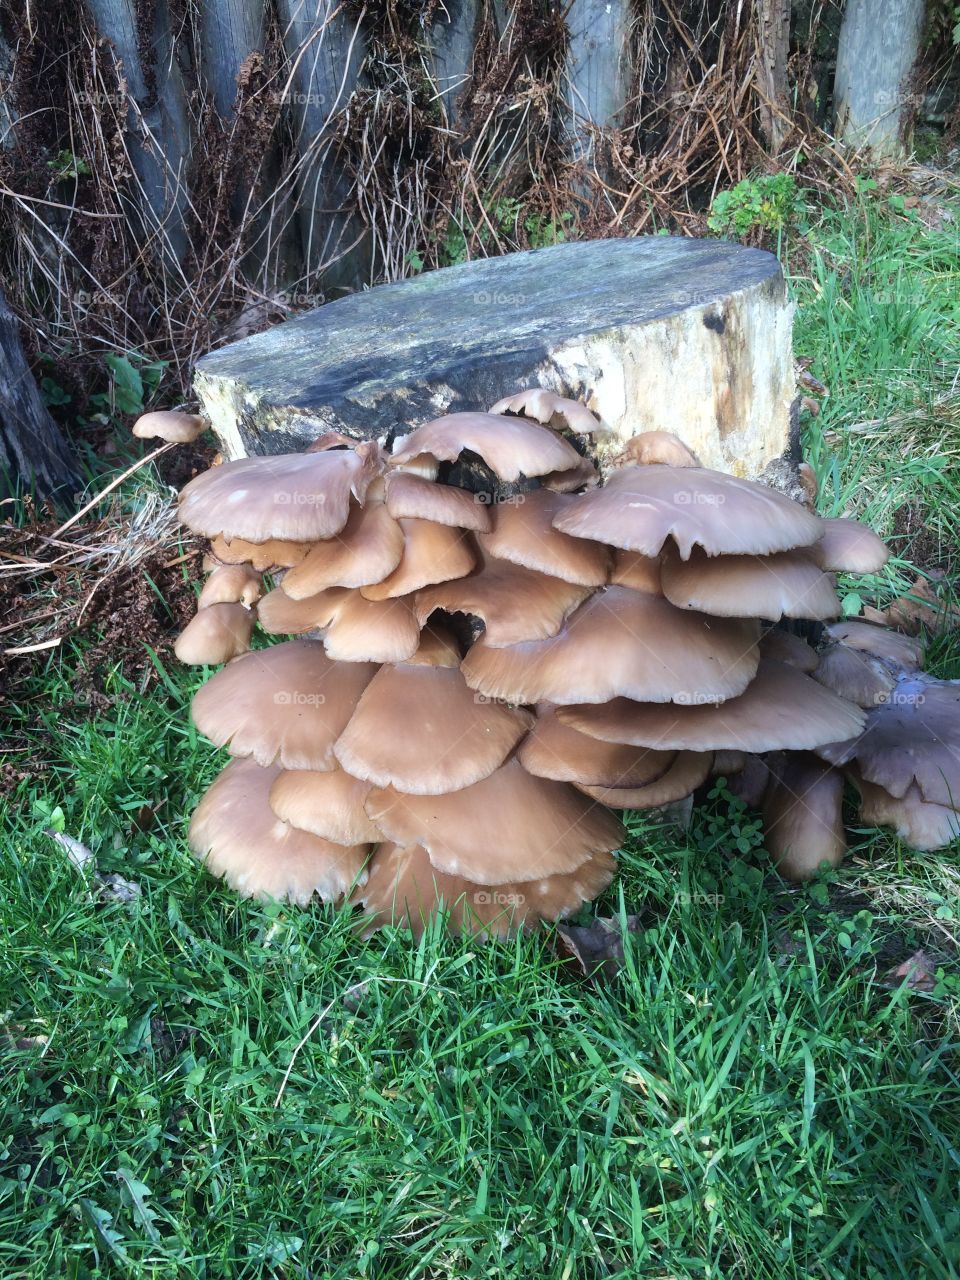 Mushrooms growing from an old tree stump. 